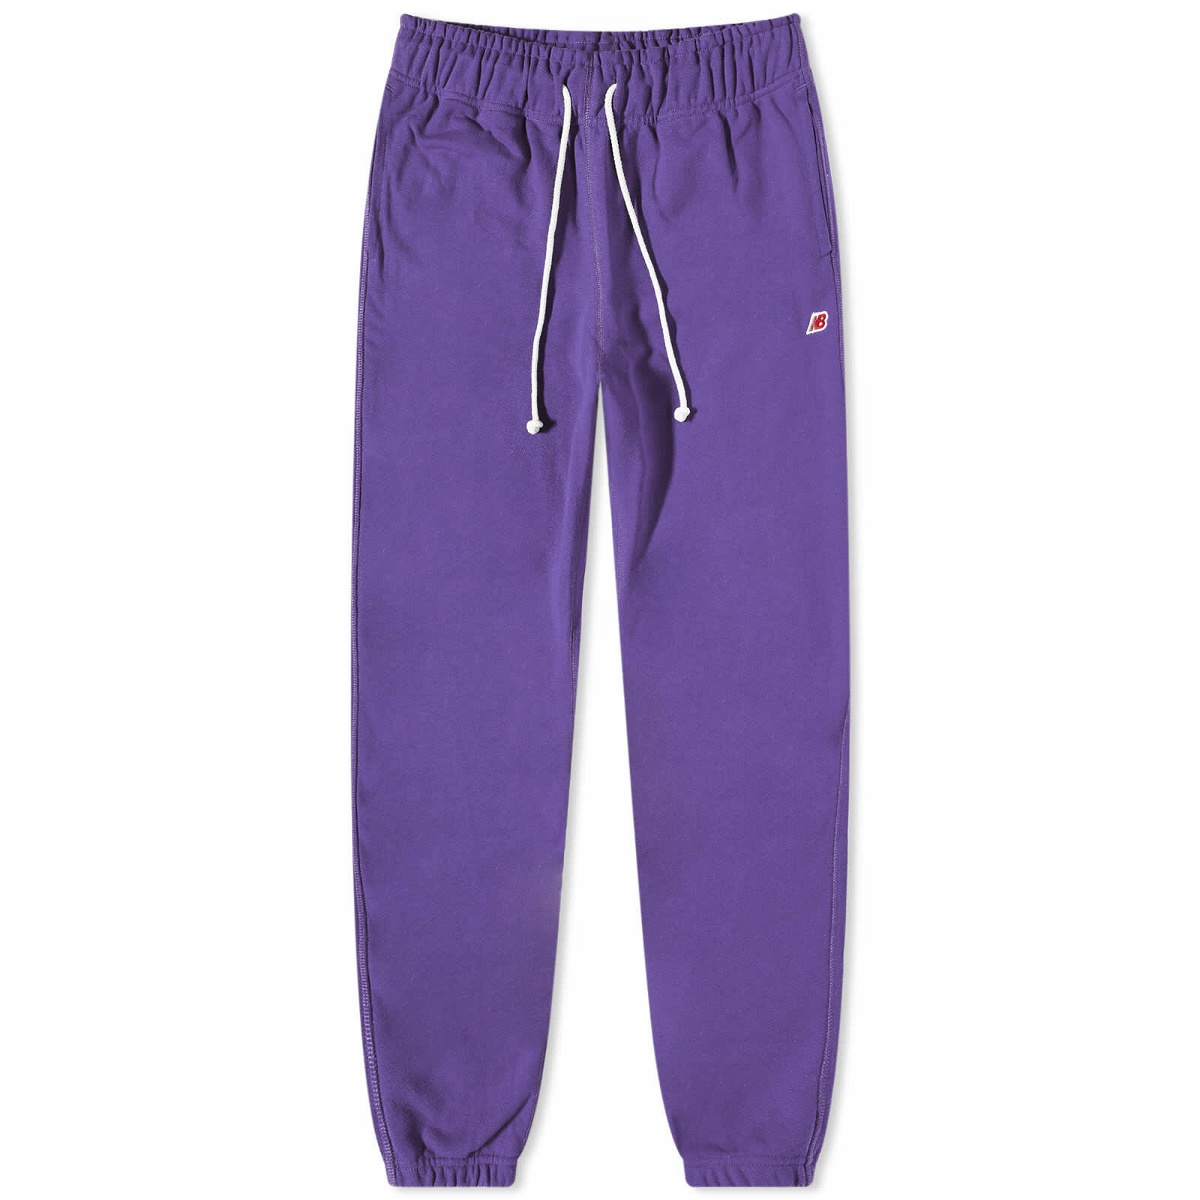 New Balance Men's Made in USA Core Sweat Pant in Prism Purple New Balance